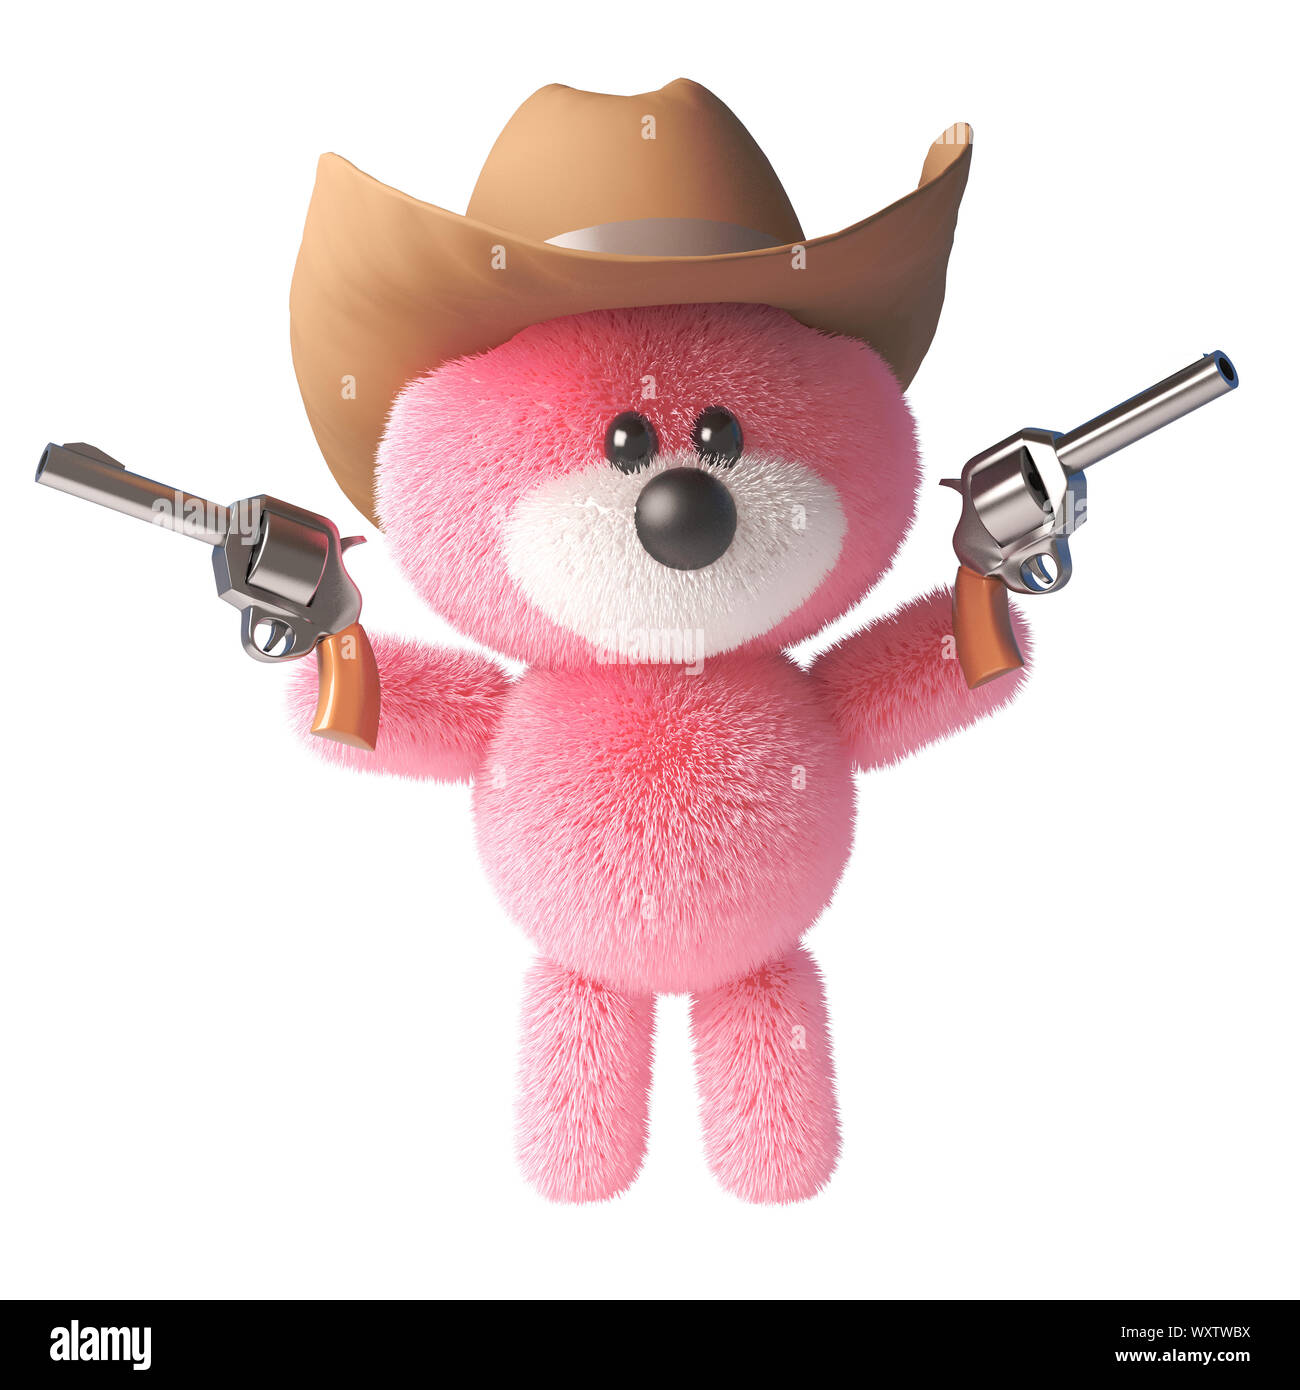 3d pink fluffy teddy bear character with soft fur wearing a cowboy stetson hat and shooting two pistols, 3d illustration render Stock Photo